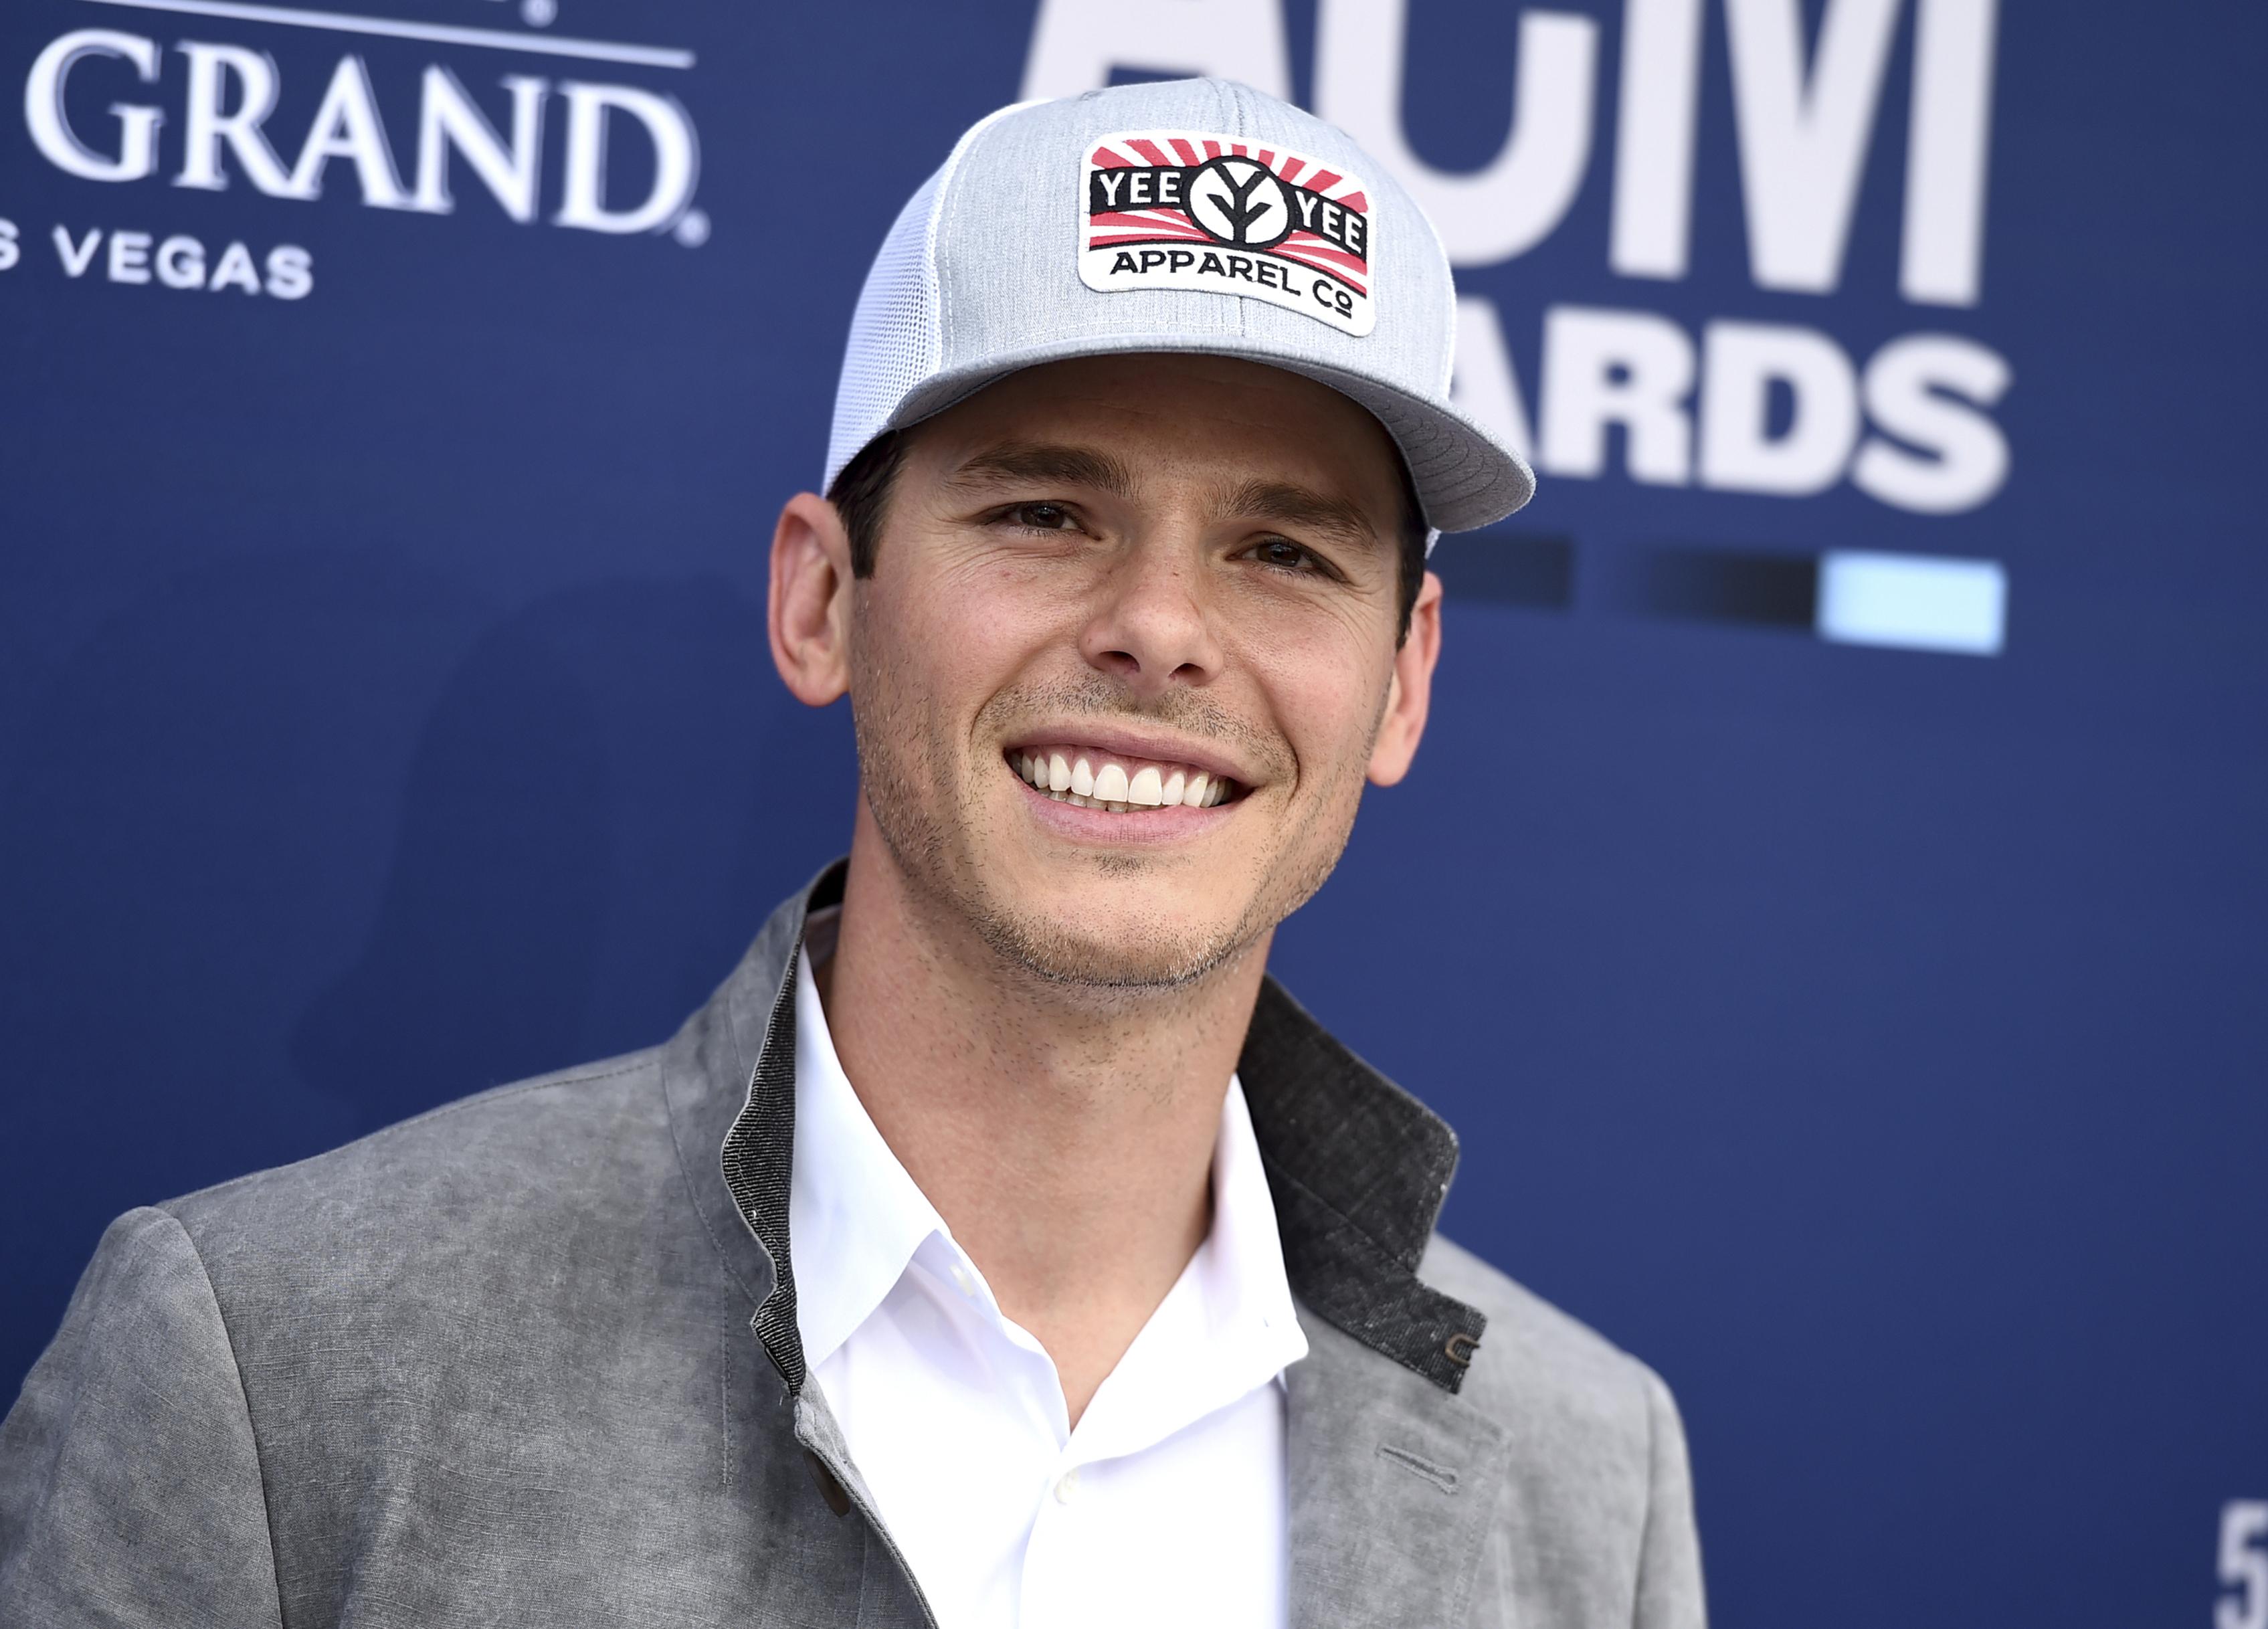 Son of country singer Granger Smith dies after accident